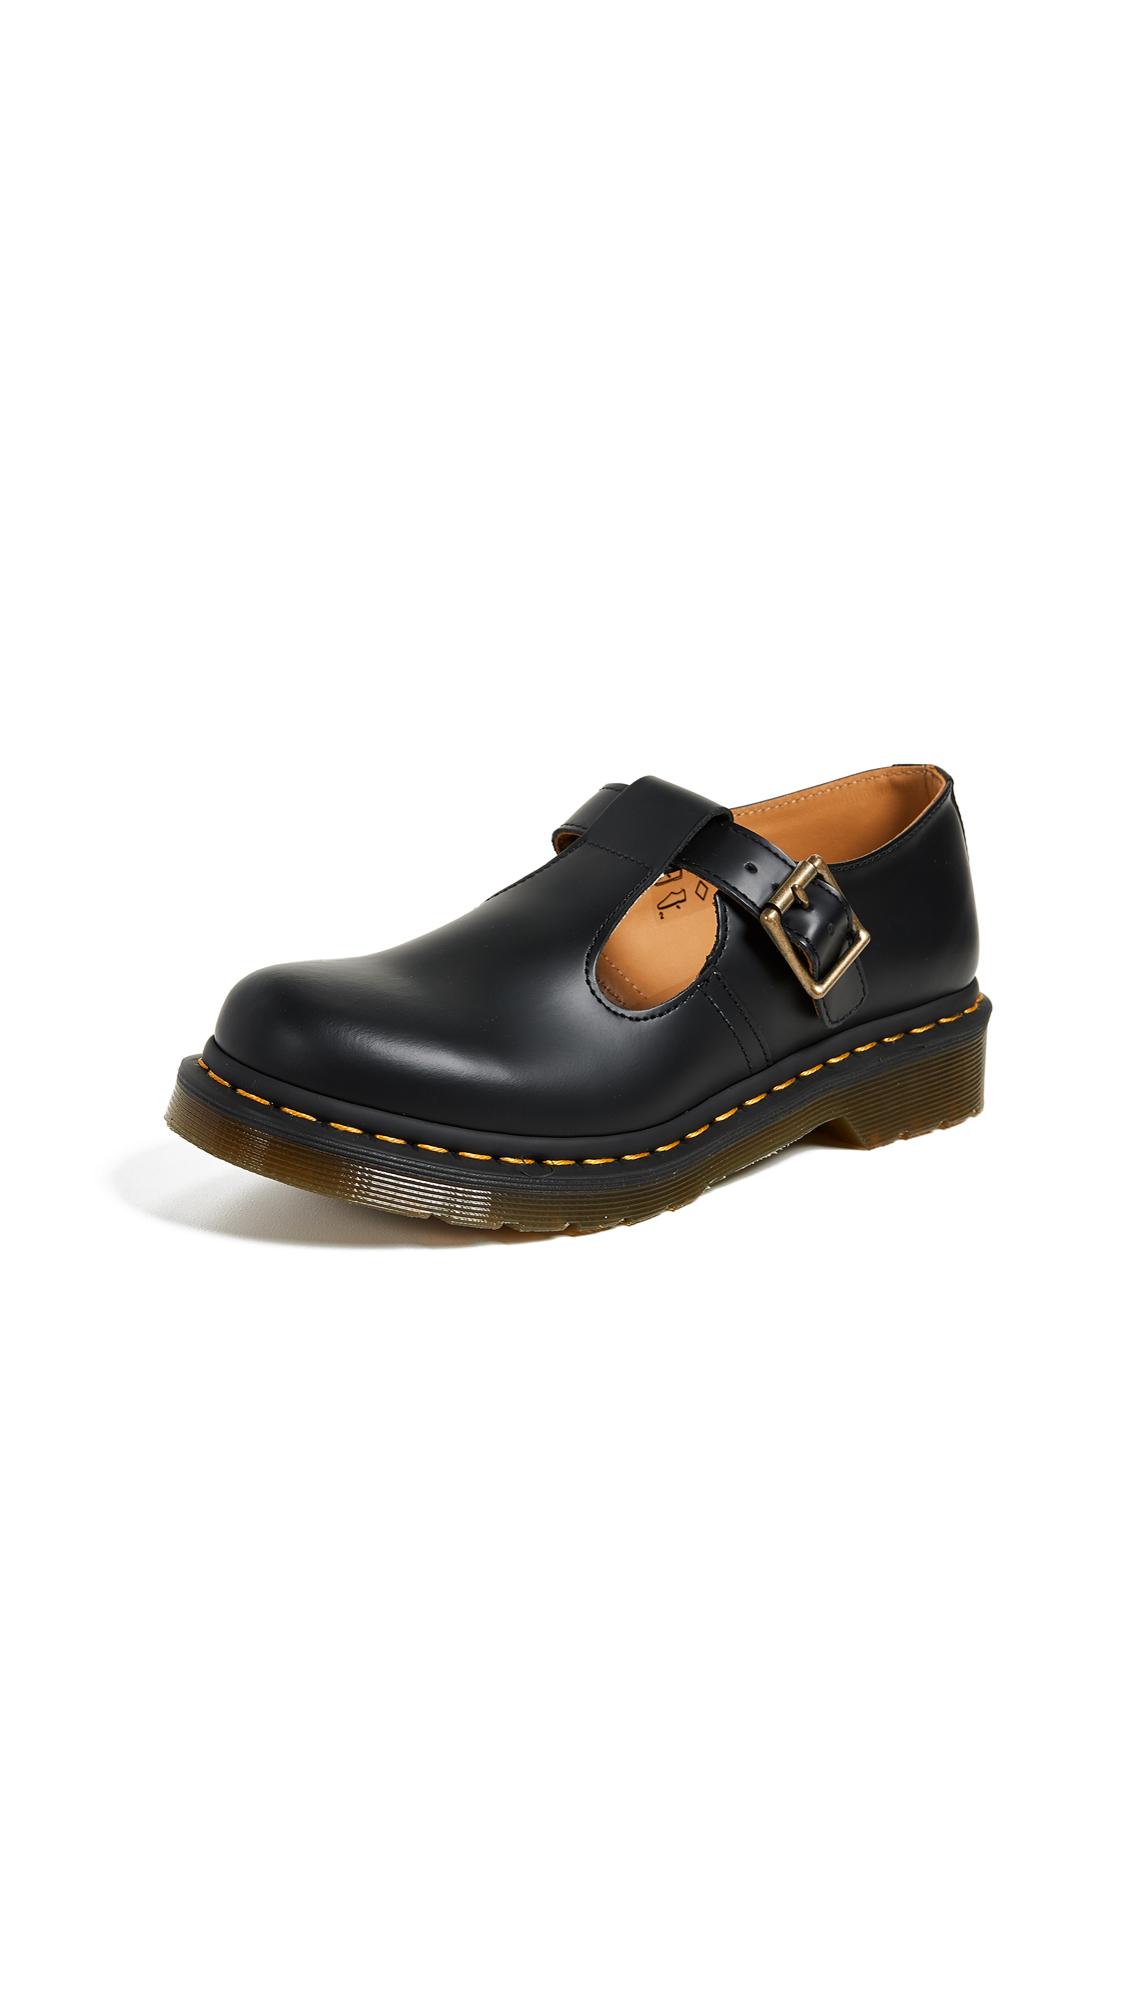 Dr. Martens Leather Polley T-bar Mary Jane Shoes in Black - Lyst